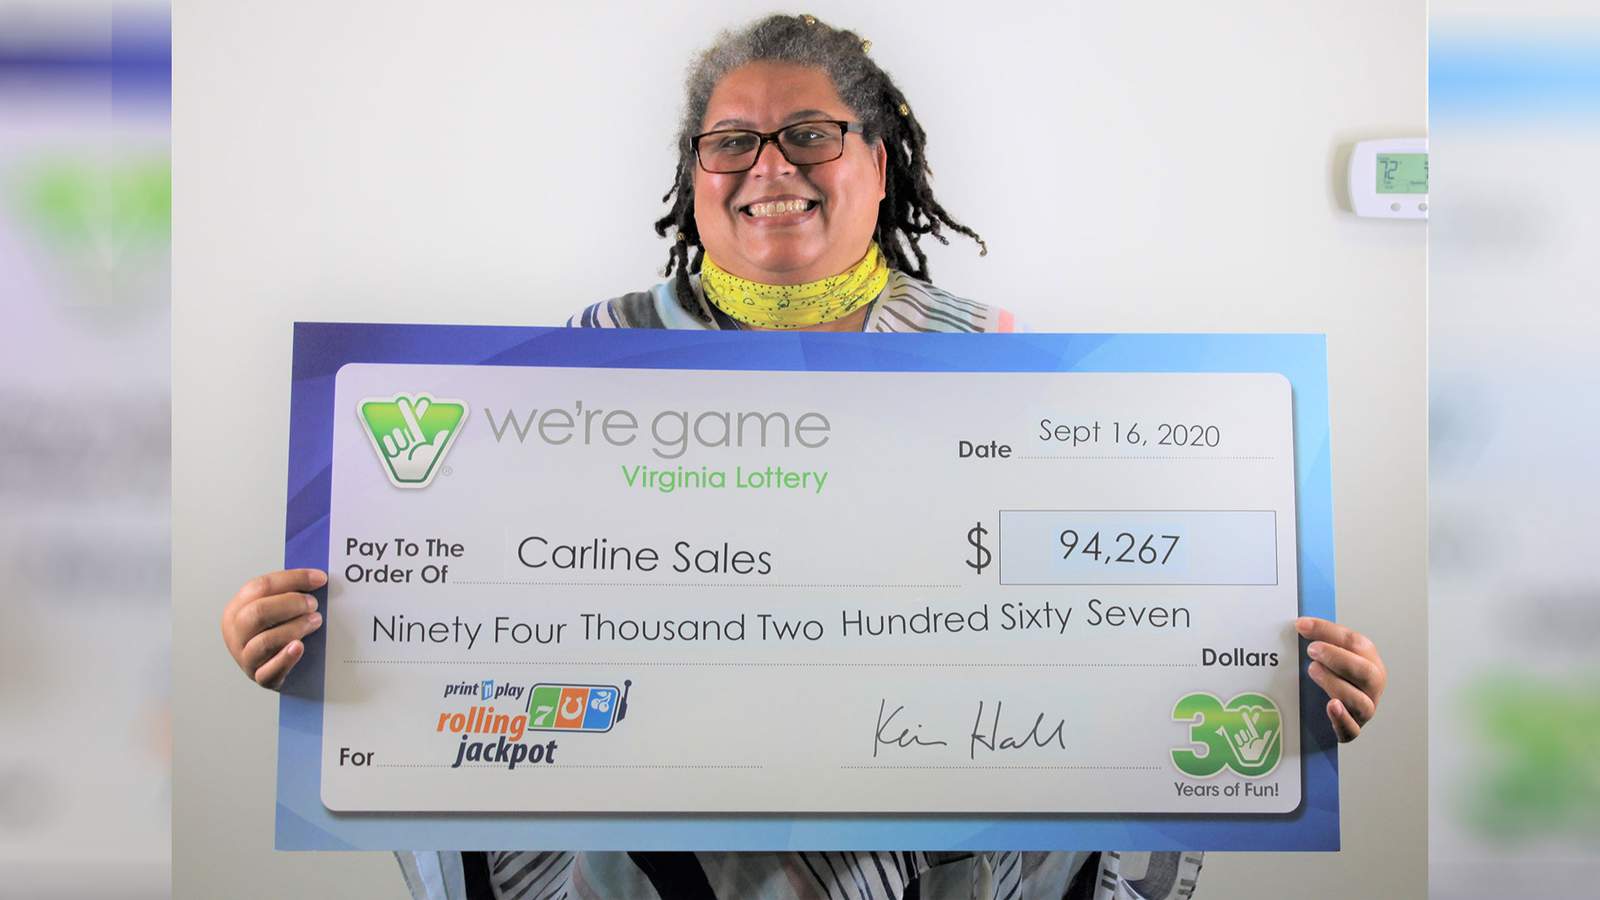 Madison Heights woman wins nearly $100,000 from Virginia Lottery ticket